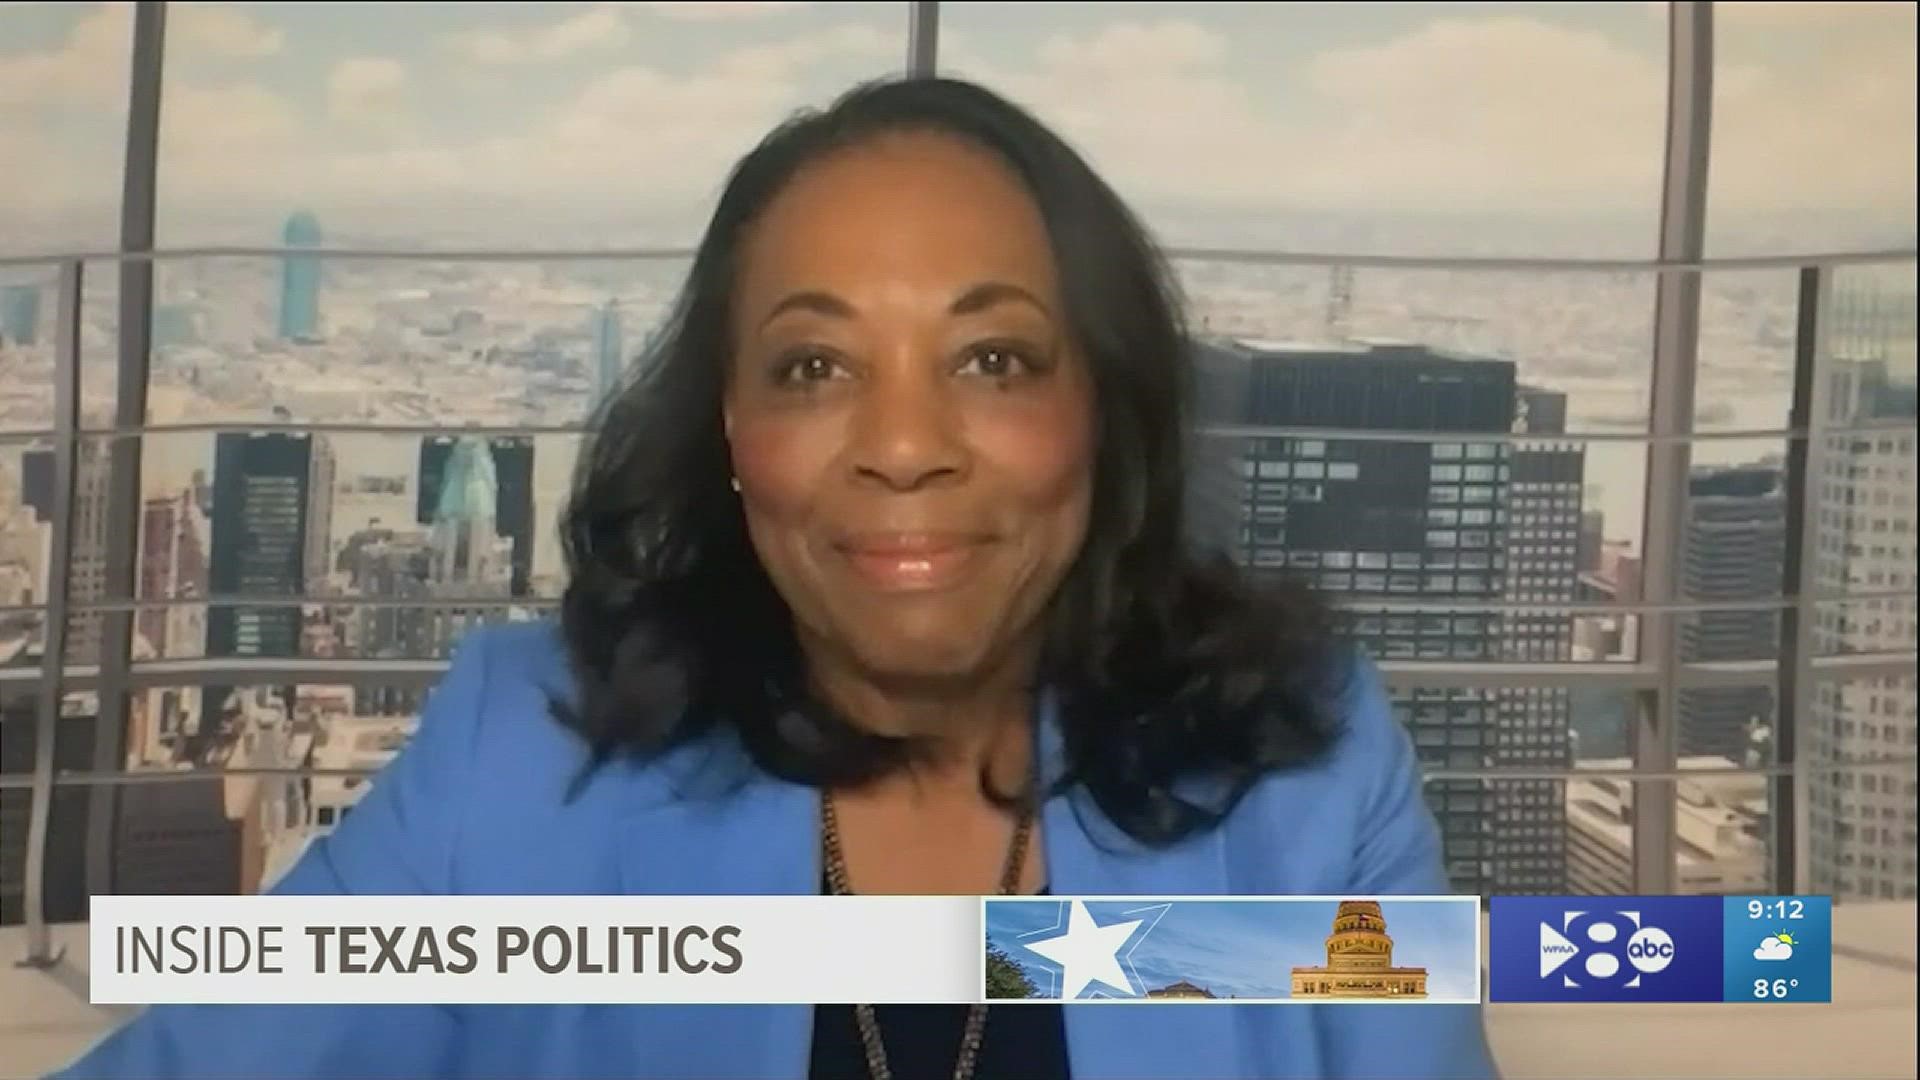 Highly accomplished women will share their strategies for success. Keynote speaker, former judge Vanessa Gillmore, sits down with Inside Texas Politics.